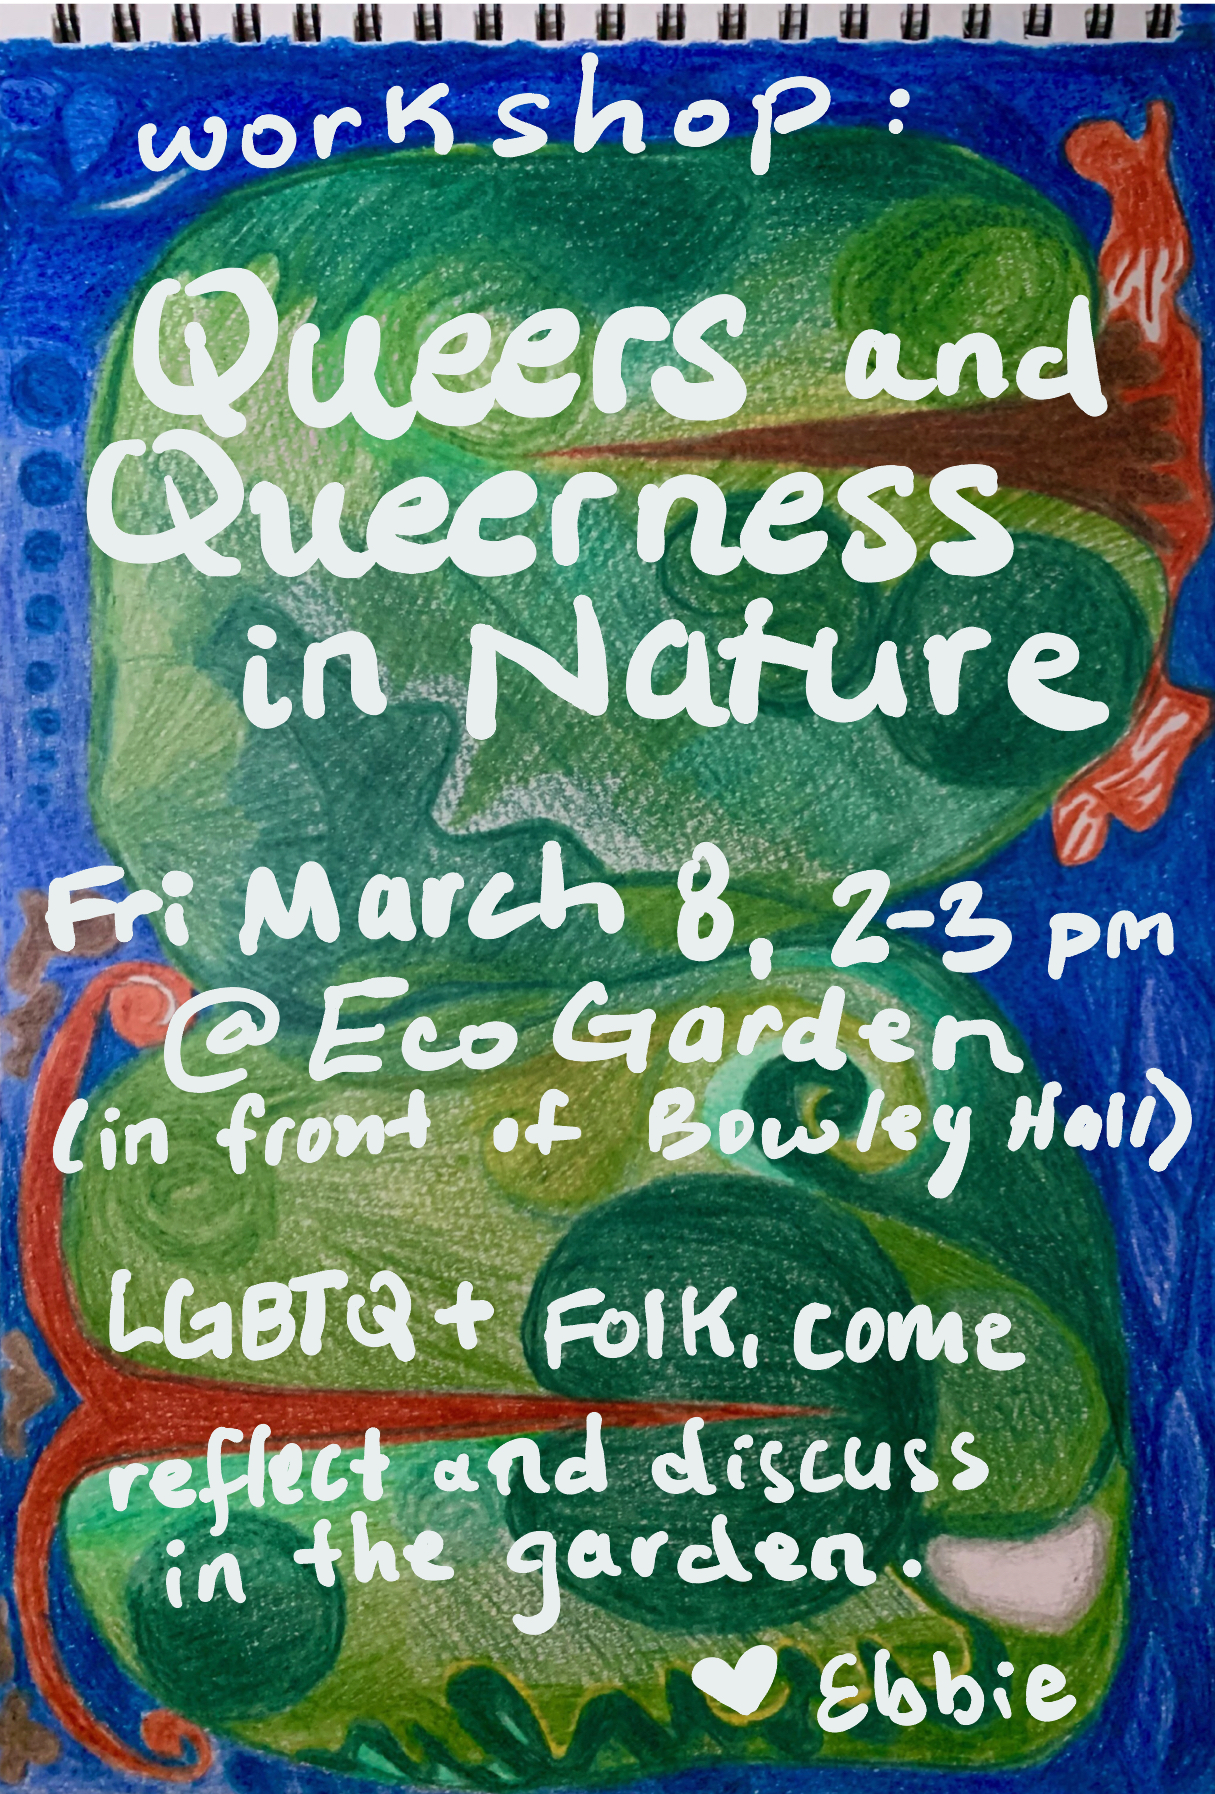 Queers & Queerness in Nature - Painting in Notebook